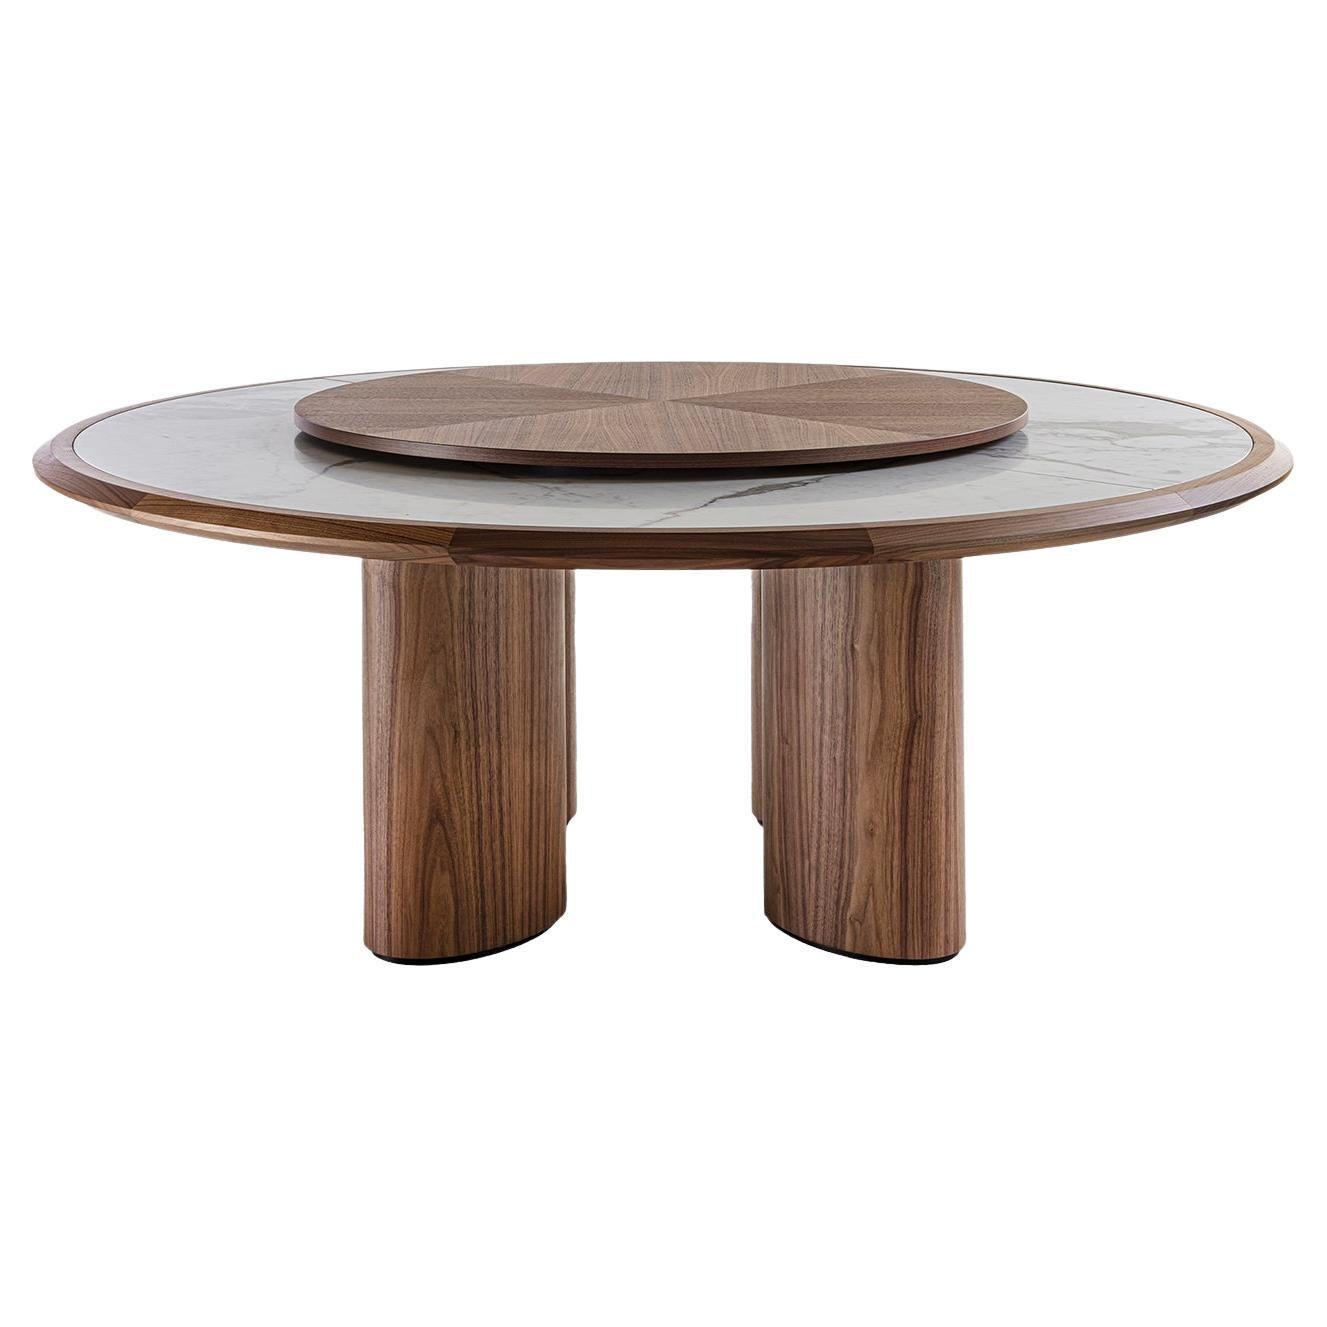 Diamante Round Canaletto & Carrara Marble Table With Lazy Susan